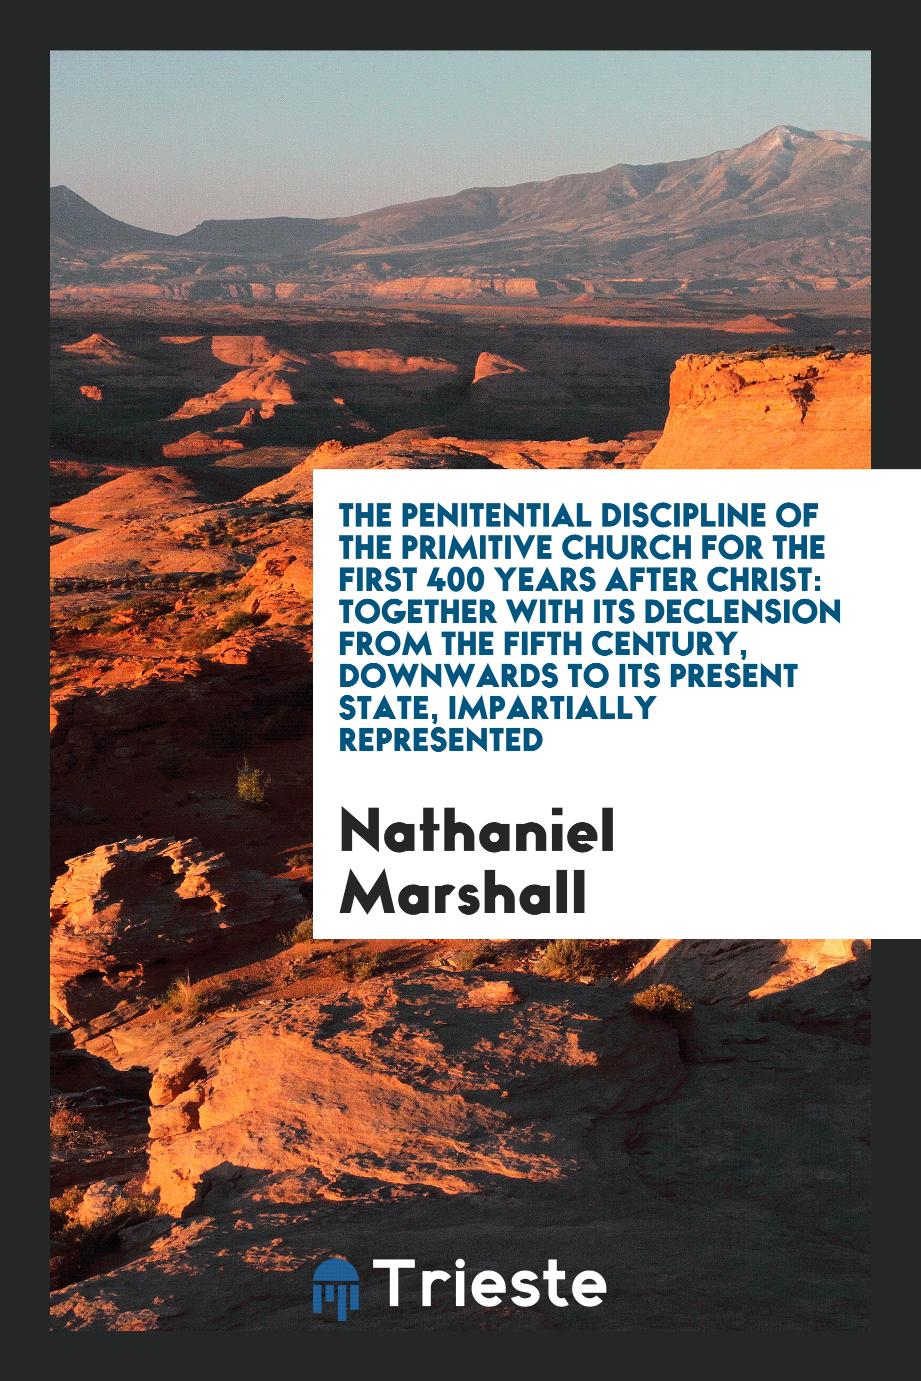 The penitential discipline of the primitive church for the first 400 years after Christ: together with its declension from the fifth century, downwards to its present state, impartially represented